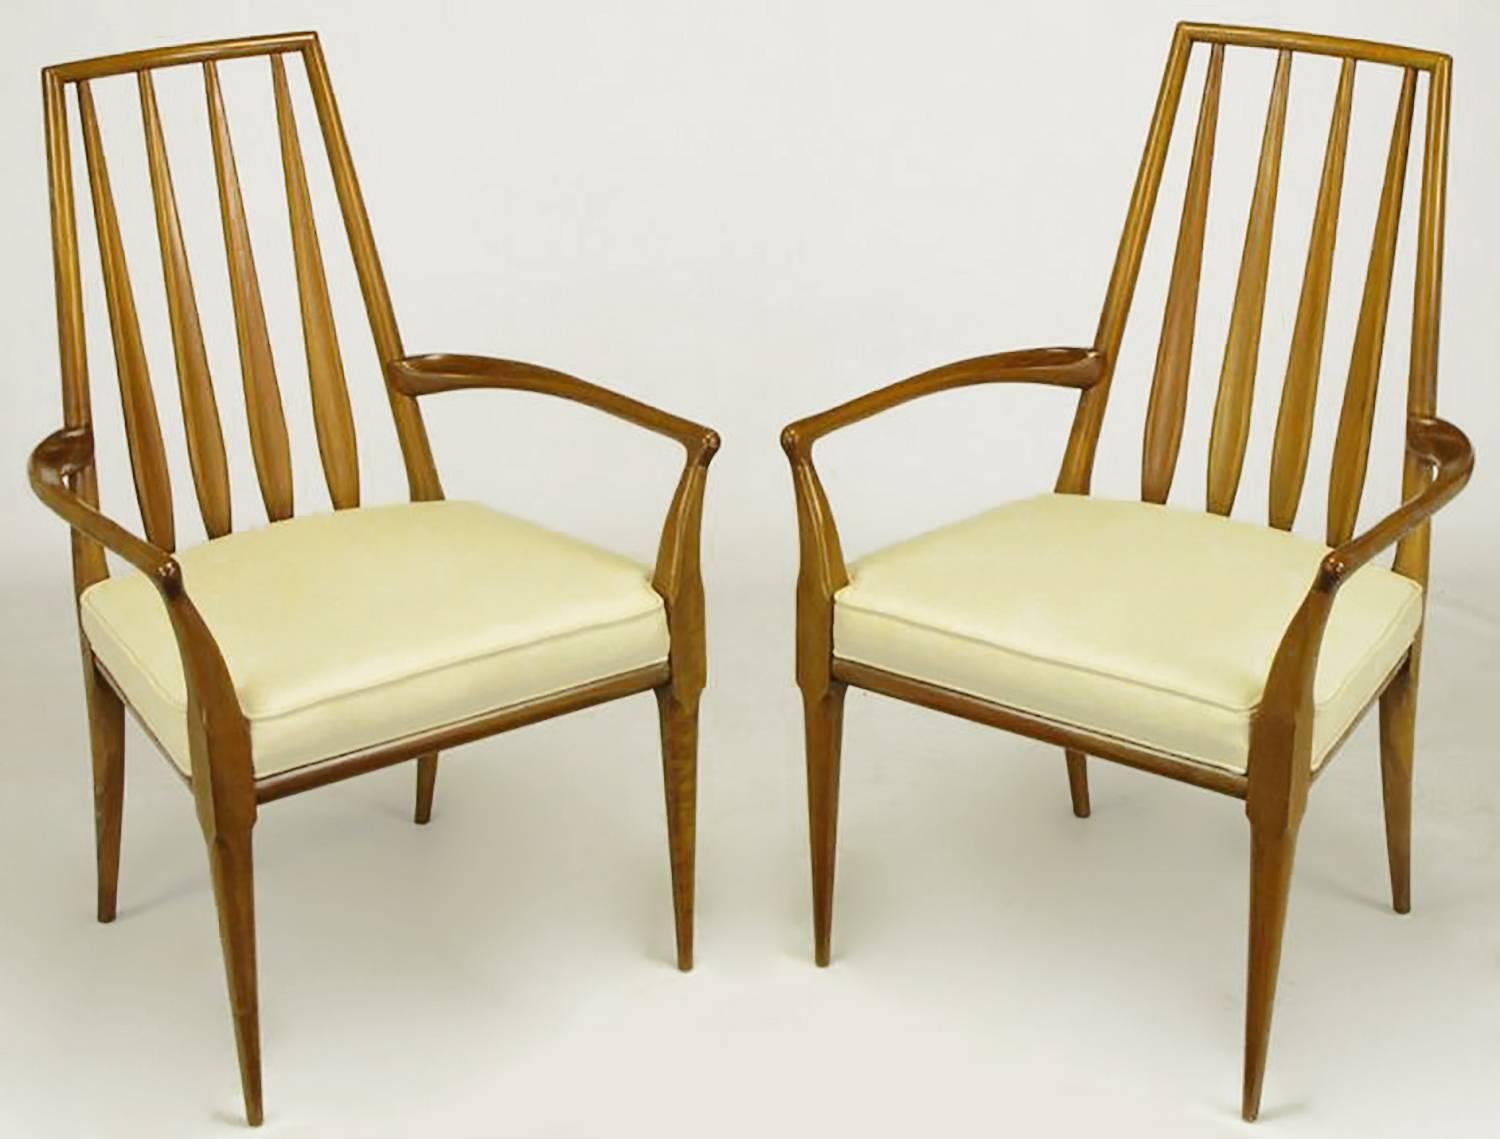 Pair of Bert England for Johnson Furniture sculpted walnut and off-white linen upholstered arm chairs. Splayed arm supports are rounded and then square up at the seats while rounding again into Fine tapered legs. The paddle slat backs create an